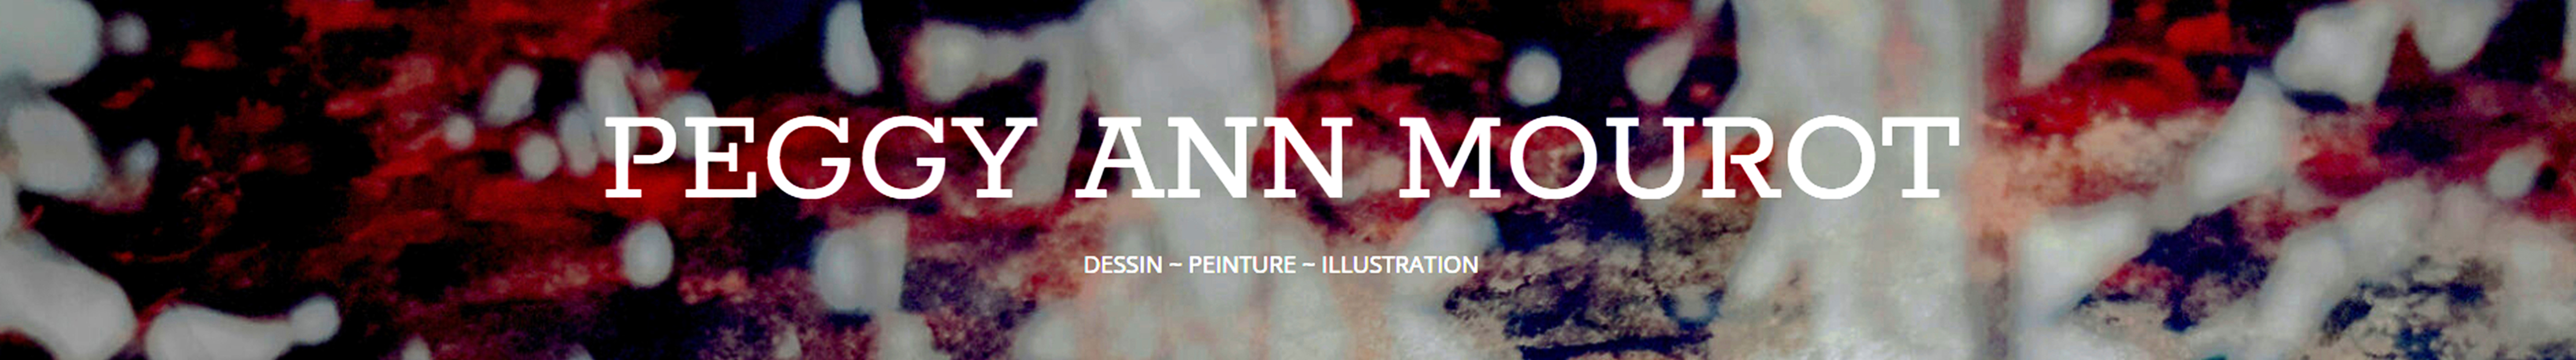 Peggy Ann Mourot's profile banner